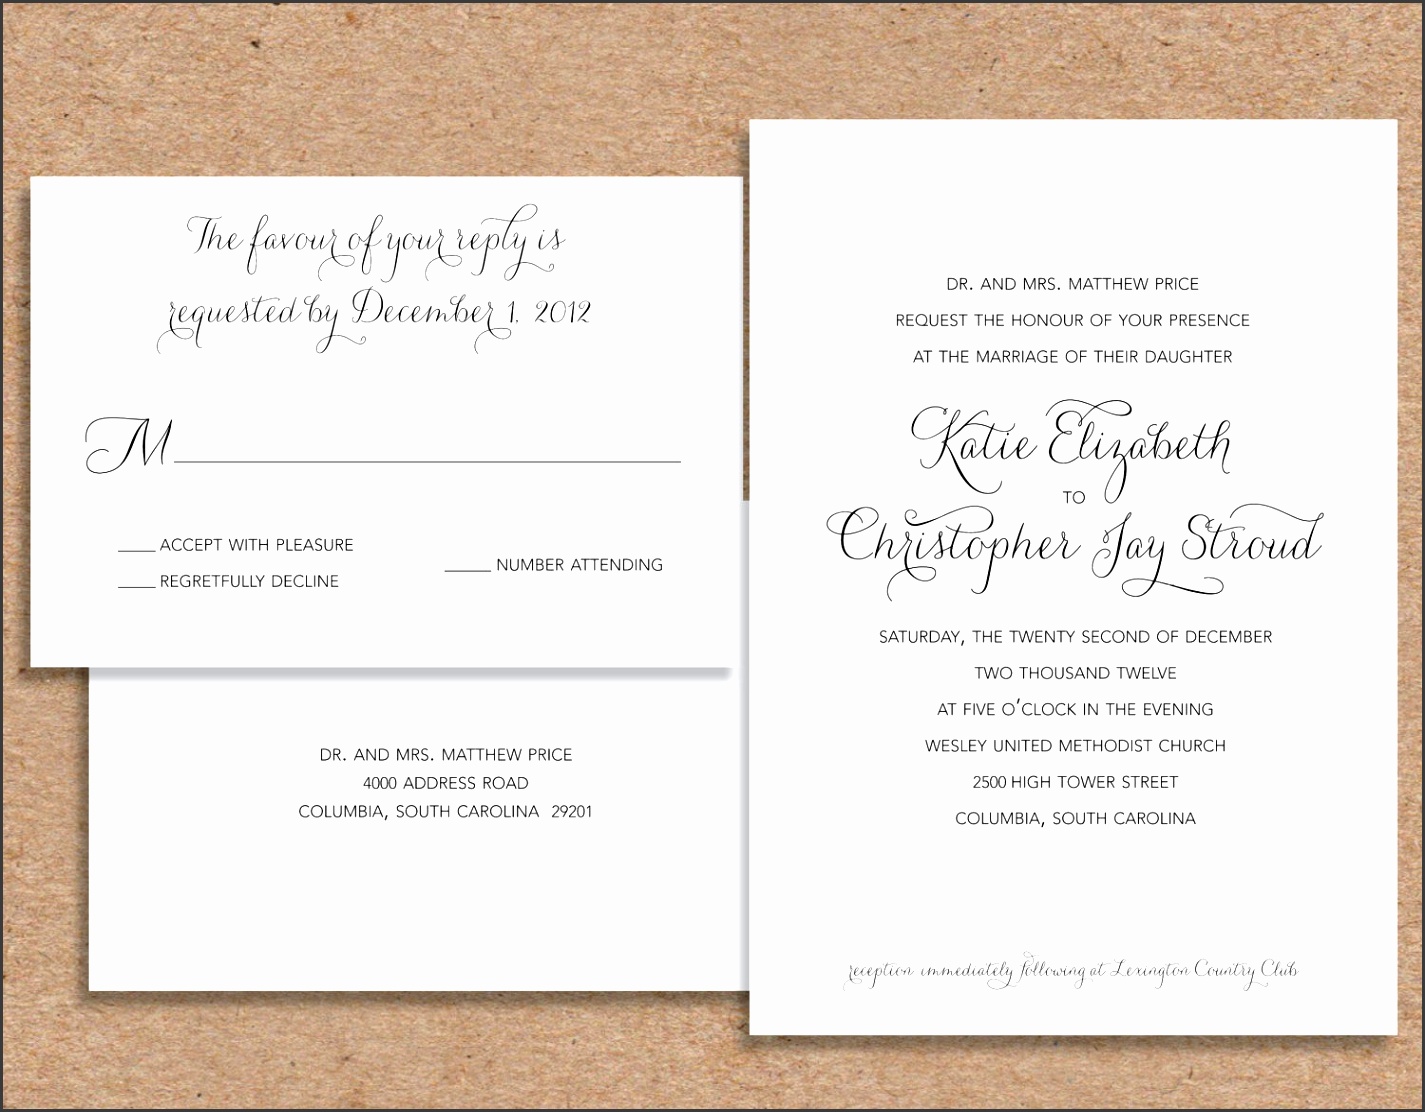 Formal Wedding Invitations With Some Fantastic Invitations Using Chic Layout Wedding Invitation Templates 7 source Ñha cÐ¾m